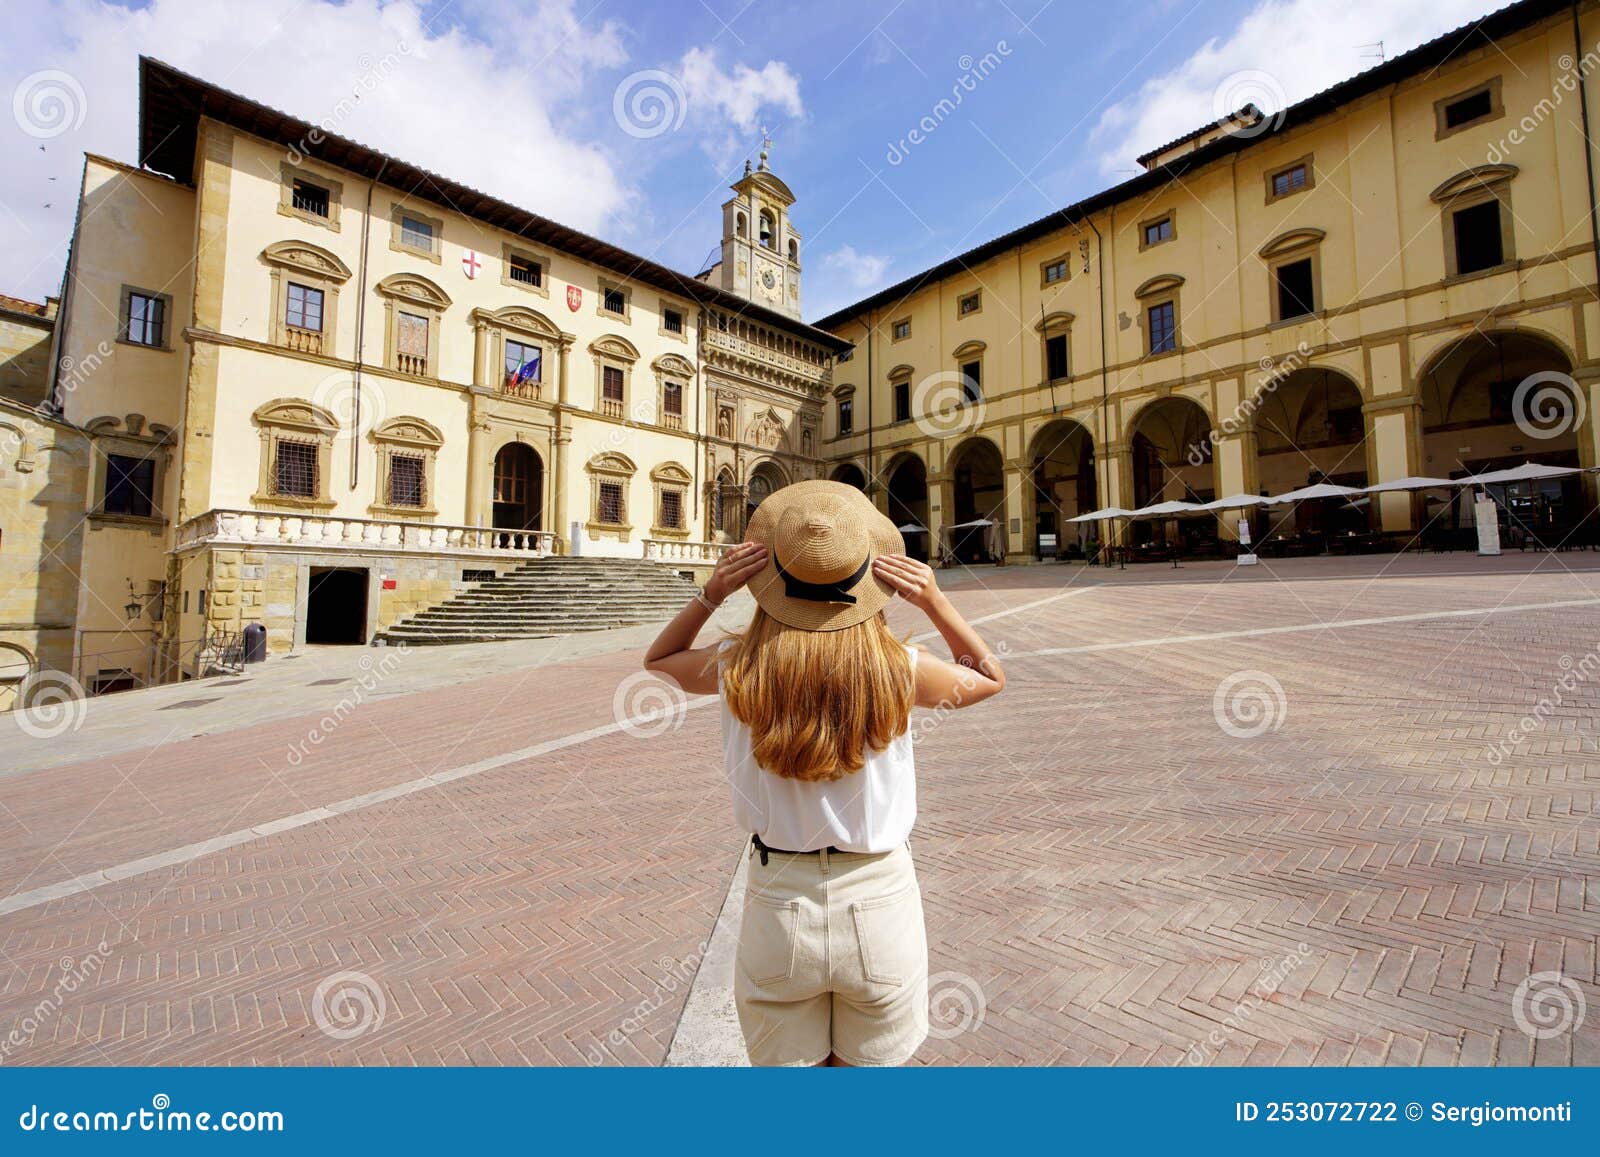 traveling in tuscany. back view of tourist girl holding hat in piazza grande square in the historic town of arezzo, tuscany, italy